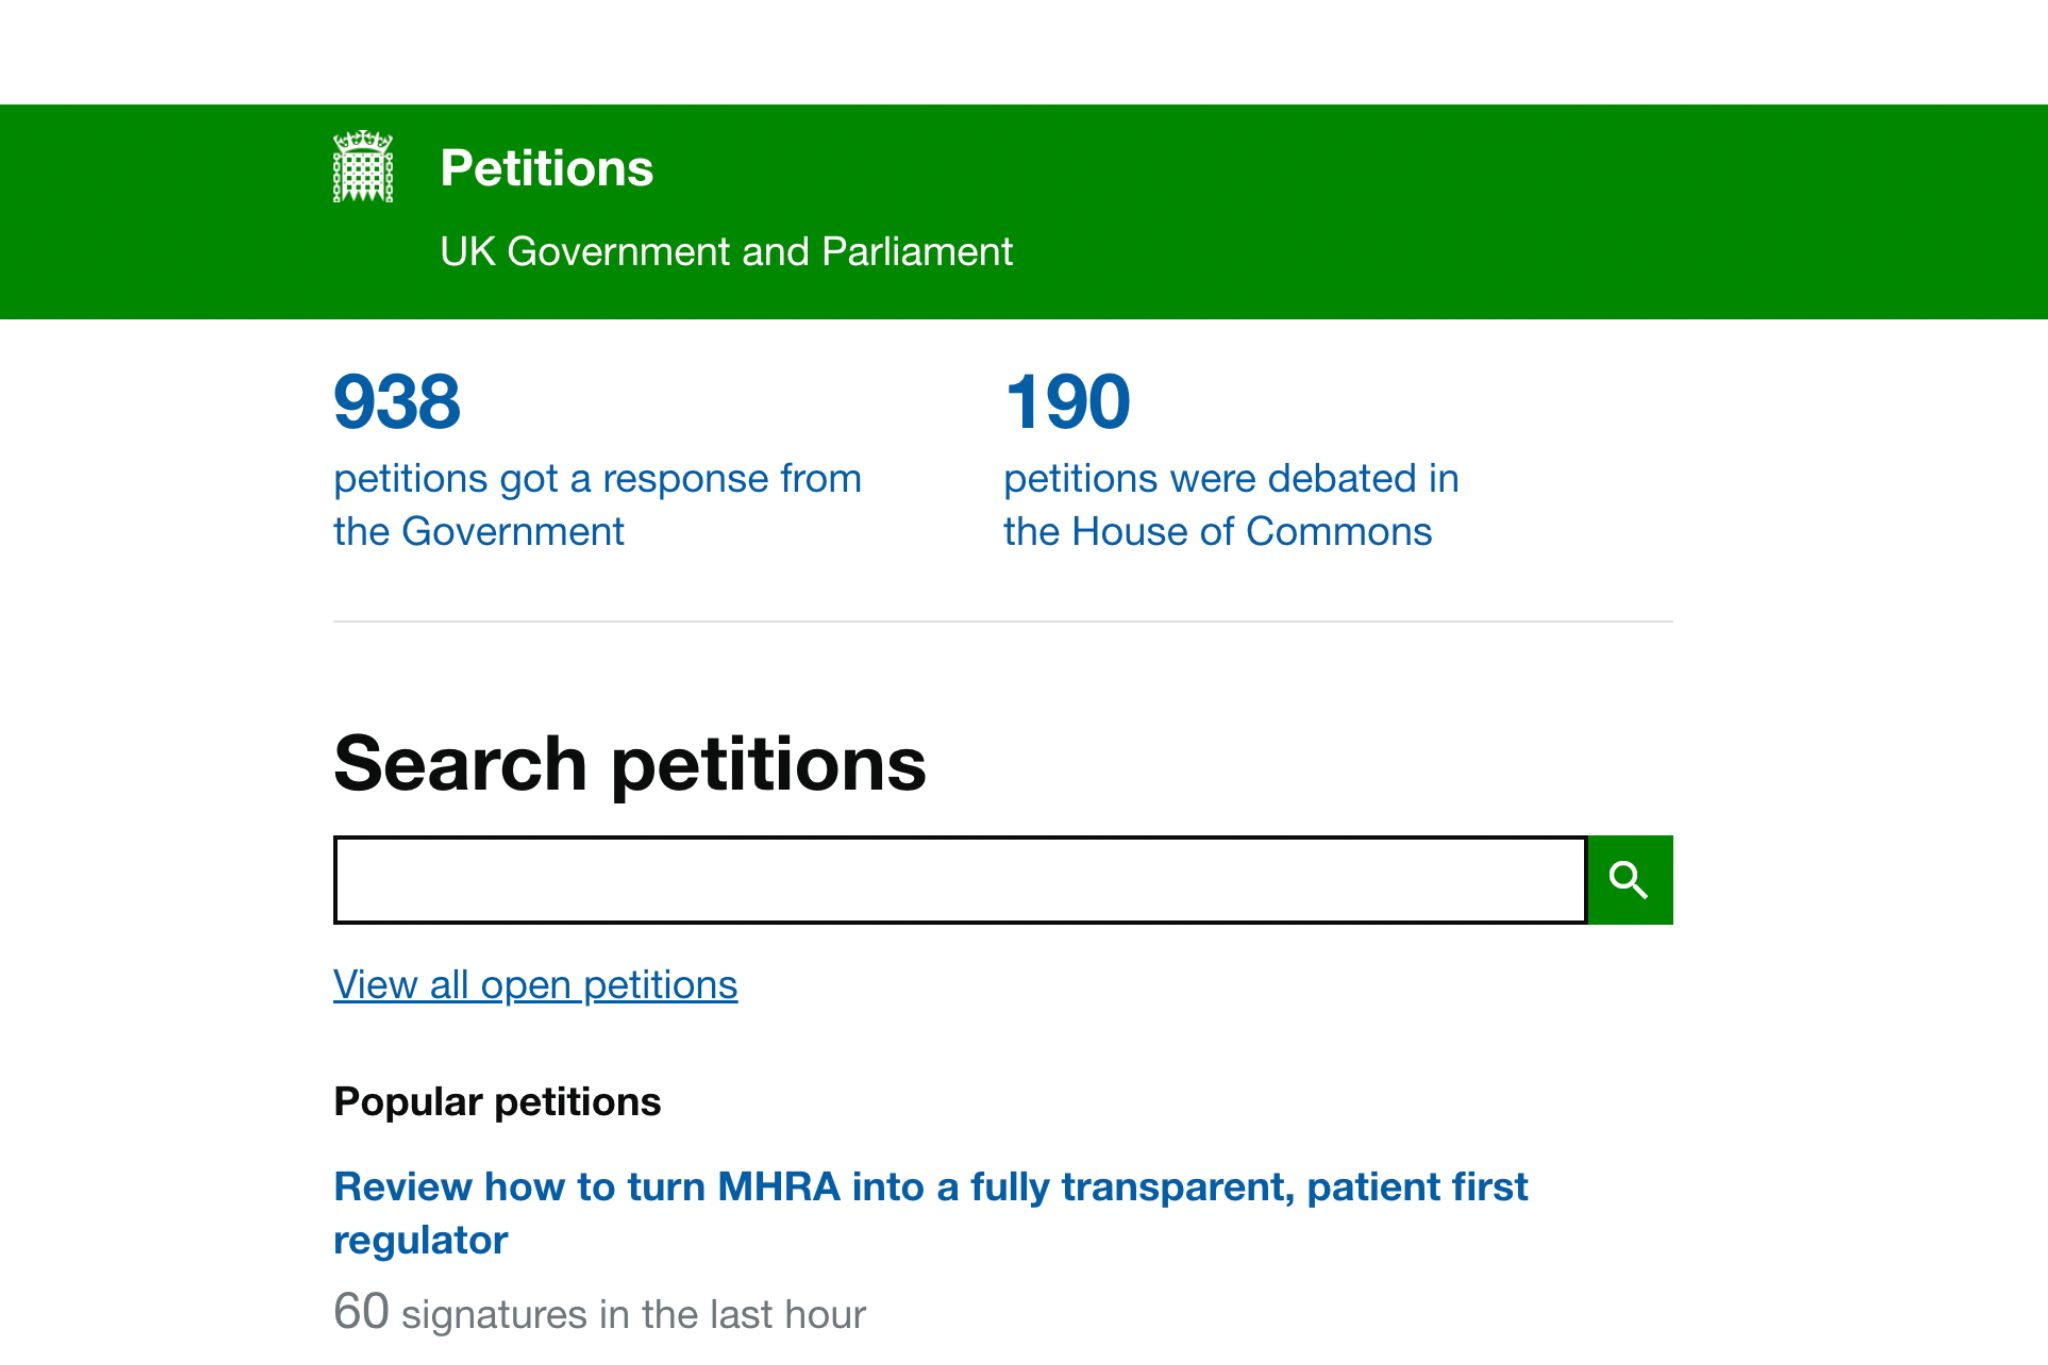 Petition platforms must reach beyond the usual suspects